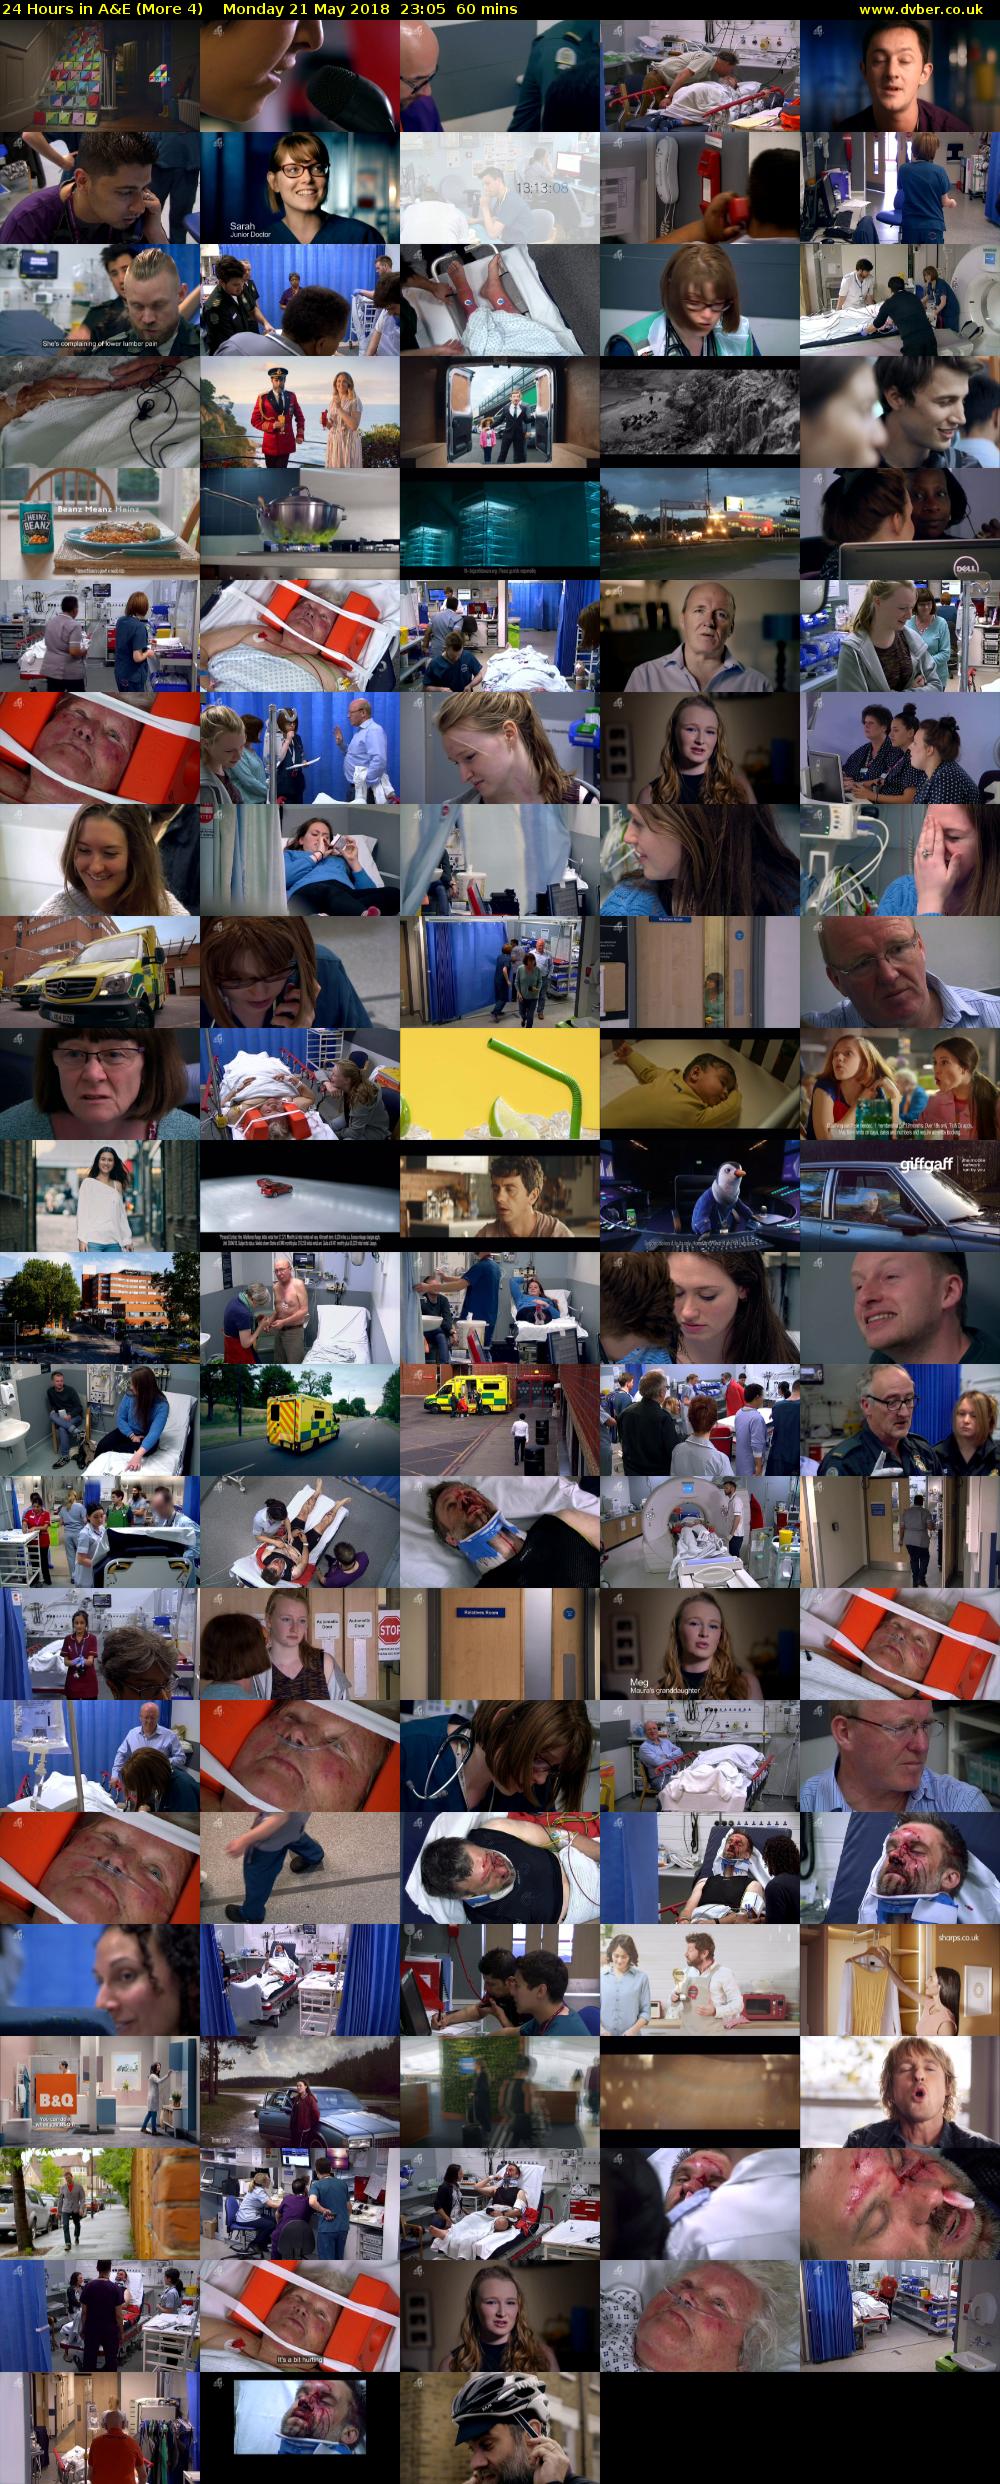 24 Hours in A&E (More 4) Monday 21 May 2018 23:05 - 00:05